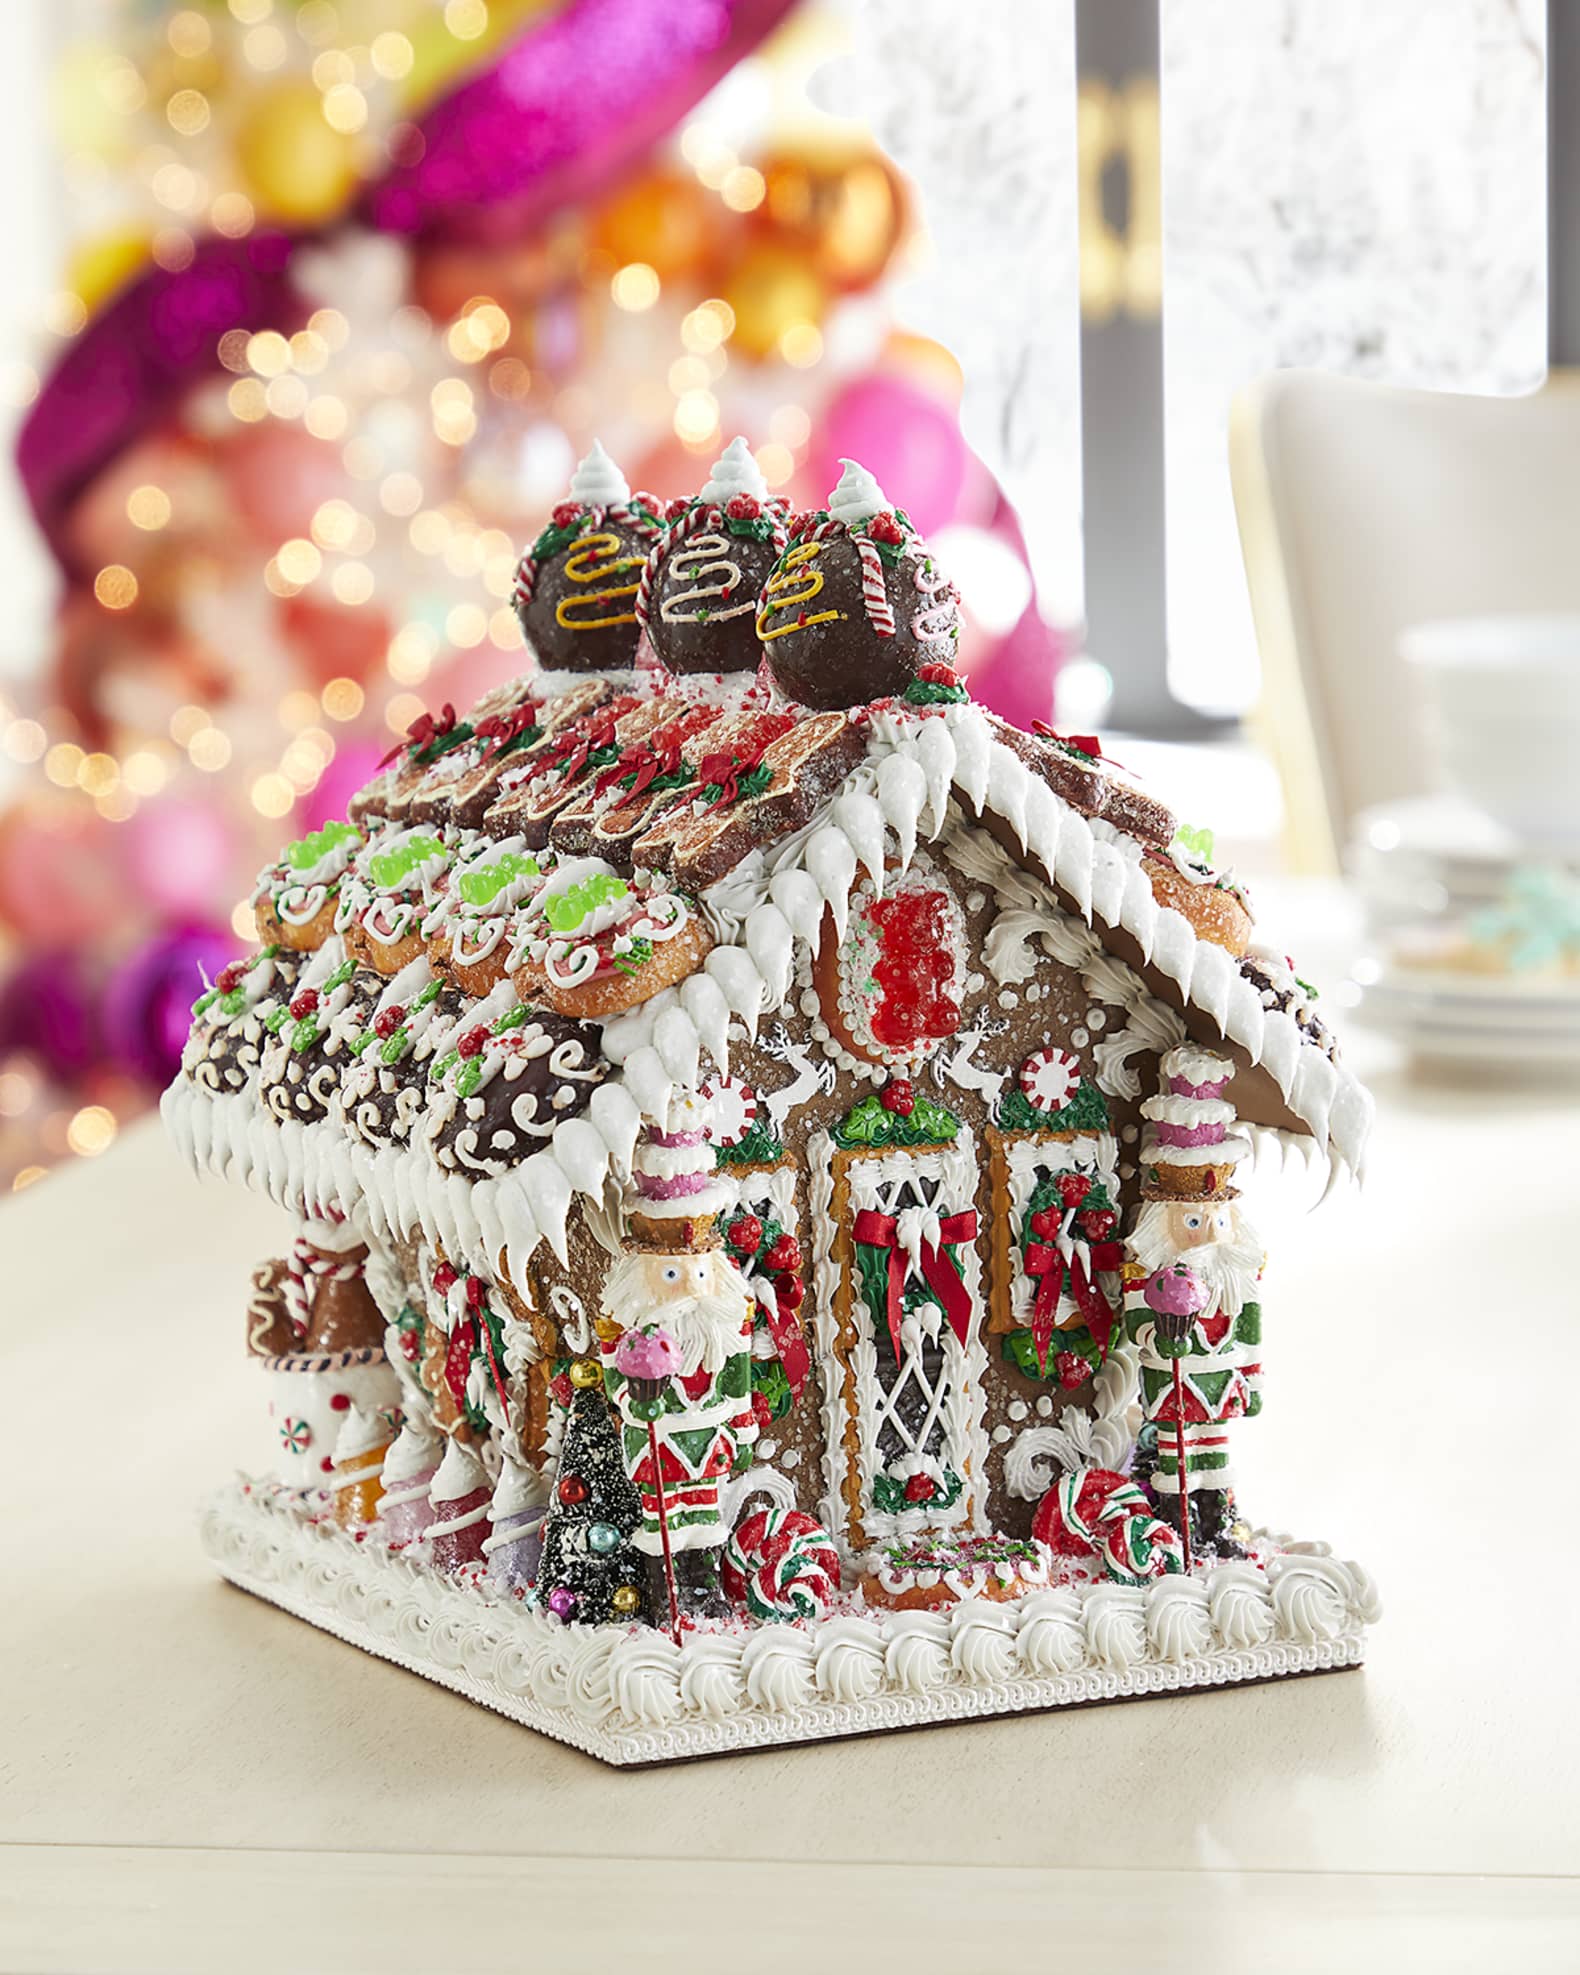 Louis Vuitton Gingerbread Houses! If you would like your company